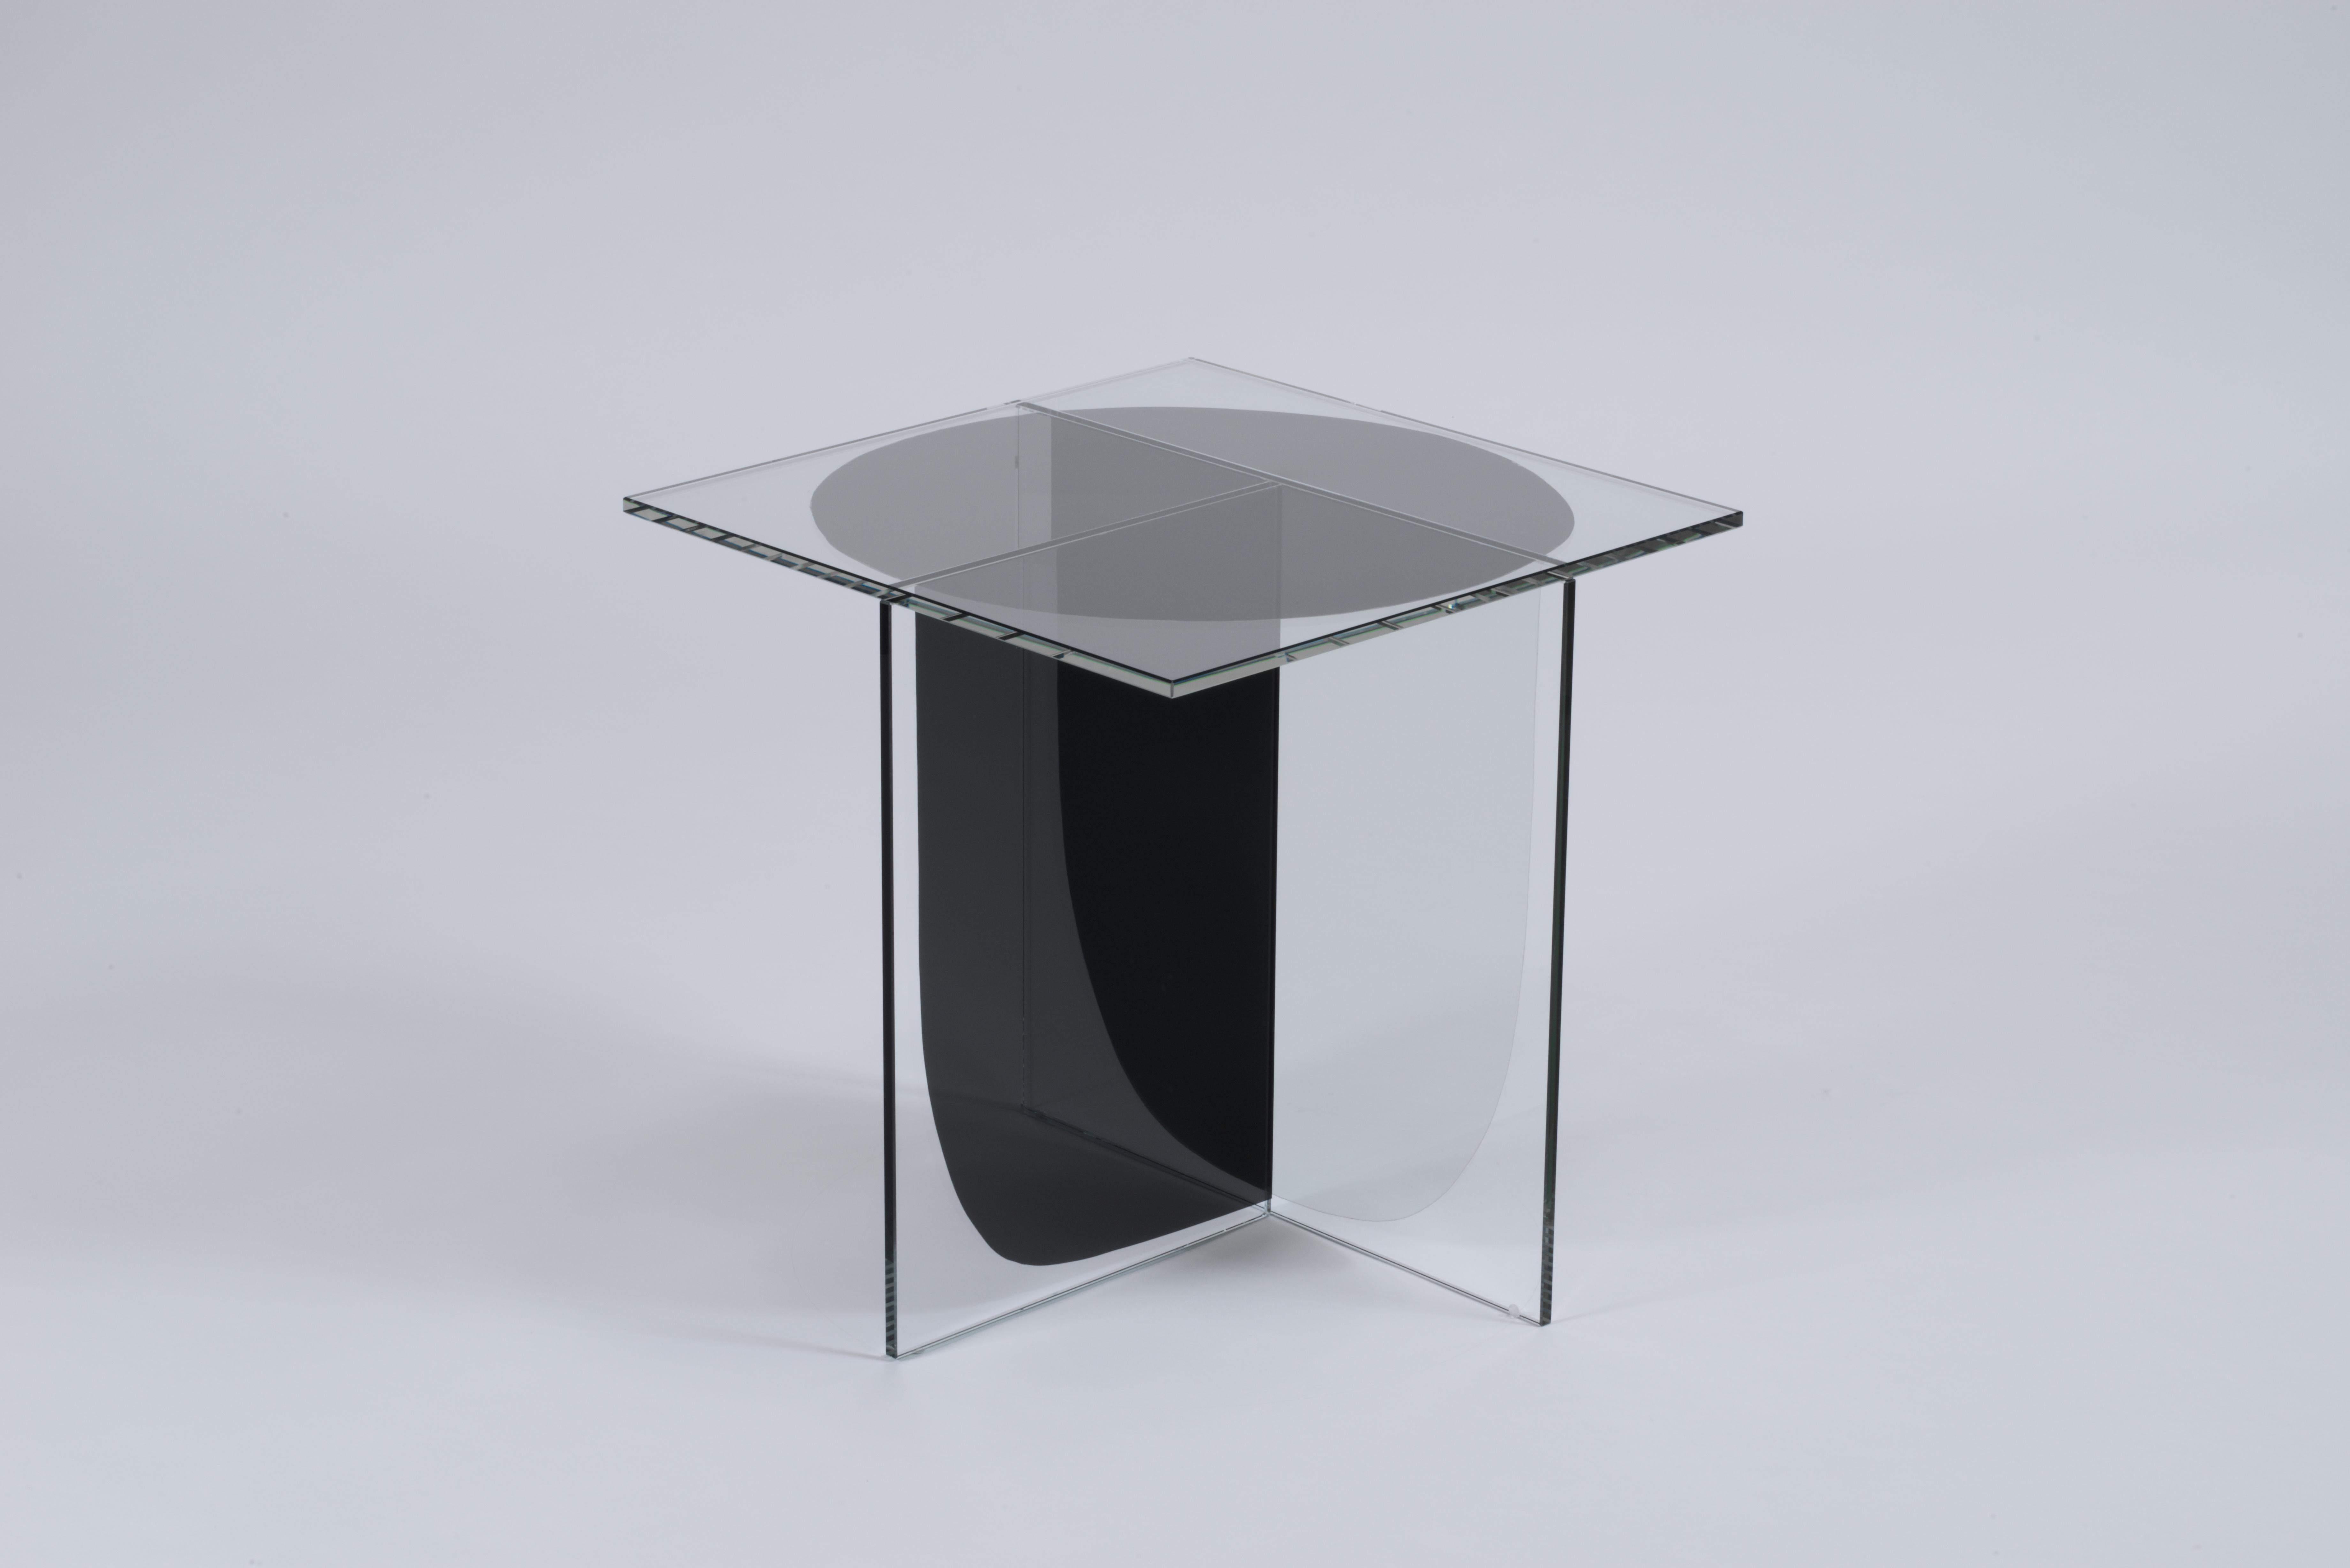 Bipolar coffee table by OS and OOS
Dimensions: 45 x 45 x 46 cm
Materials: glass and flterd laminated
Another option: Large version coffee table: 110 x 45 x 30 
Weight:
Coffee table: 27 kg

Studio OS and OOS is design studio for small objects